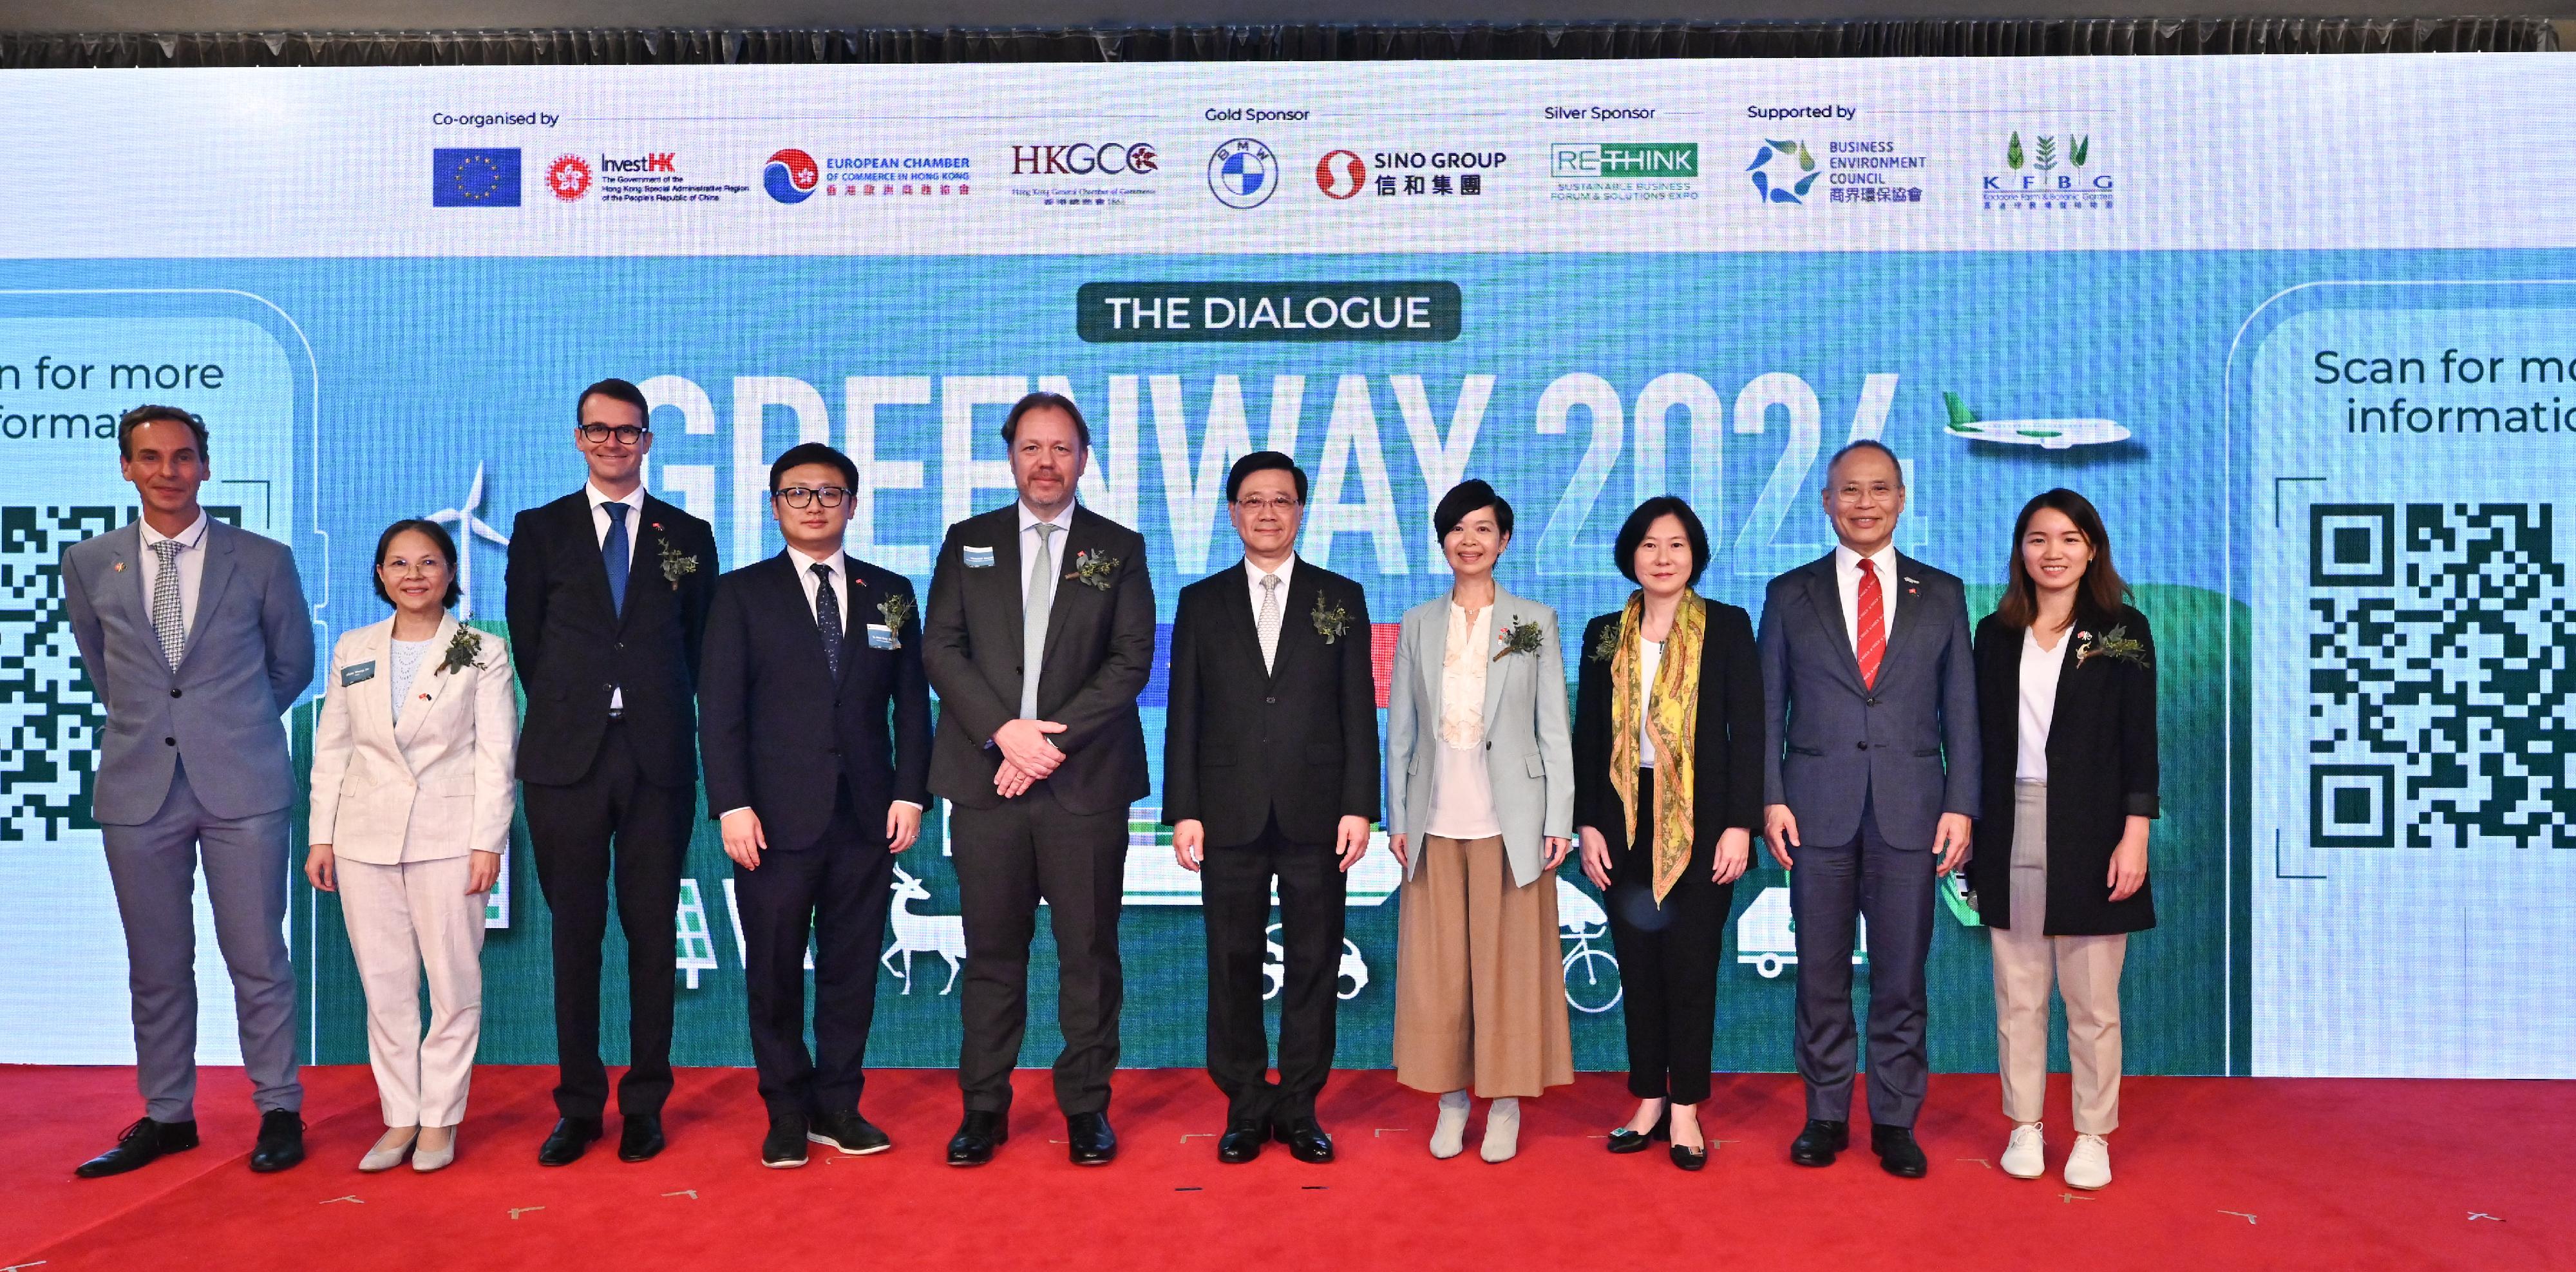 The Chief Executive, Mr John Lee, attended the Greenway 2024 The Dialogue today (April 29). Photo shows (from second left) the Under Secretary for Environment and Ecology, Miss Diane Wong; the Chair of the European Chamber of Commerce in Hong Kong, Mr Iñaki Amate; Legislative Council Member Mr Gary Zhang; the Head of the European Union Office to Hong Kong and Macao, Mr Thomas Gnocchi; Mr Lee; the Secretary for Housing, Ms Winnie Ho; the Director-General of Investment Promotion, Ms Alpha Lau, and other guests at the event.